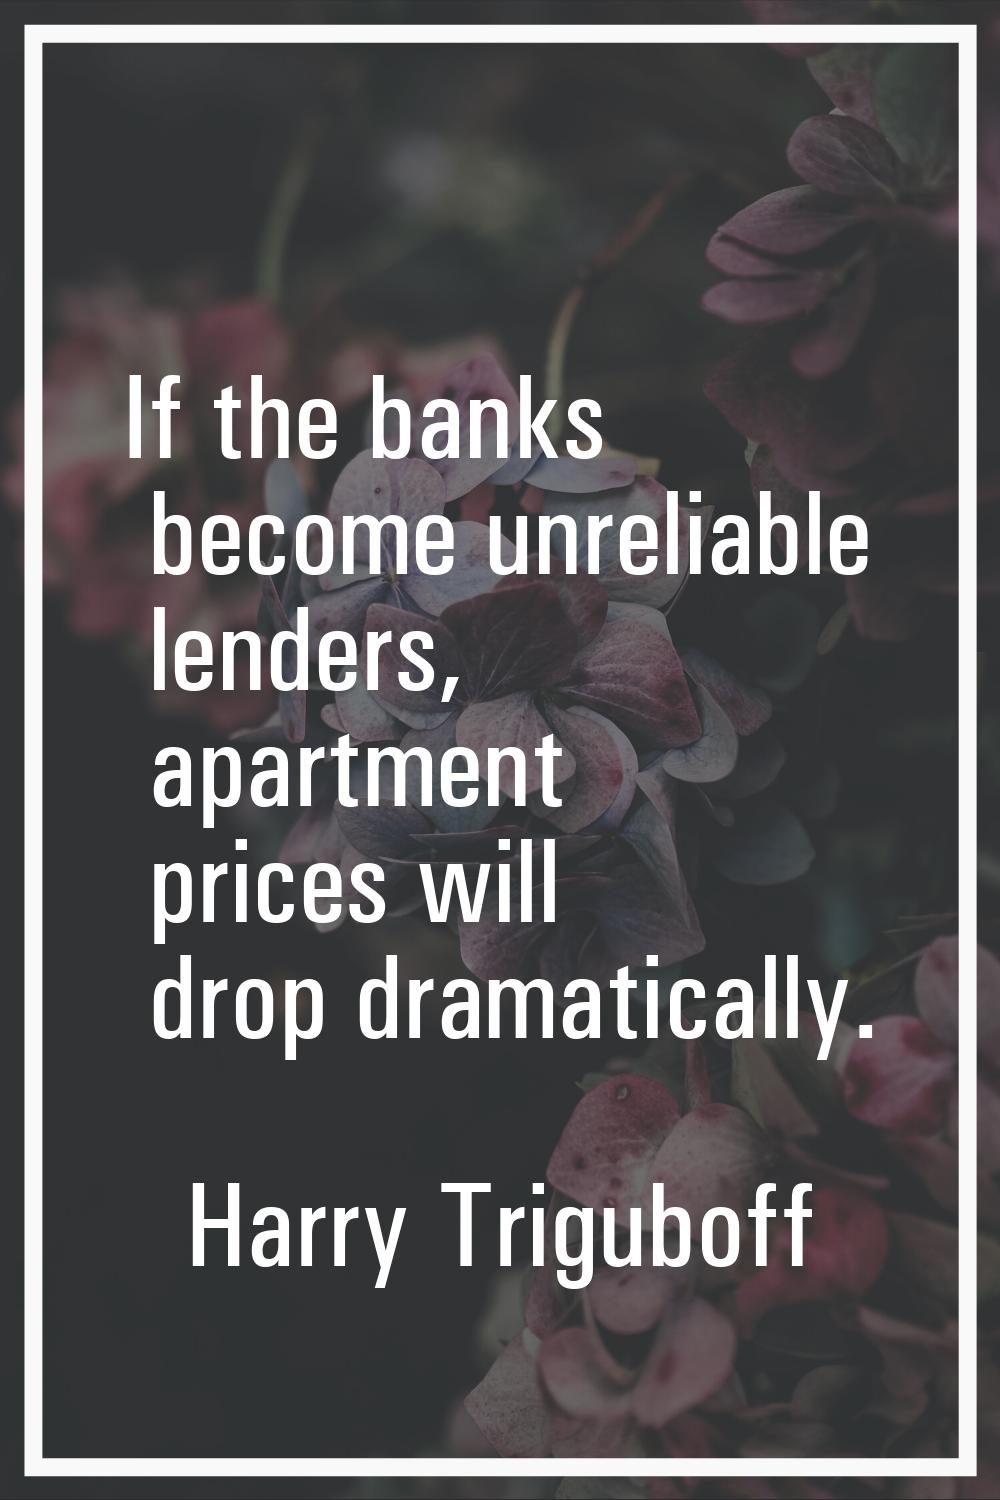 If the banks become unreliable lenders, apartment prices will drop dramatically.